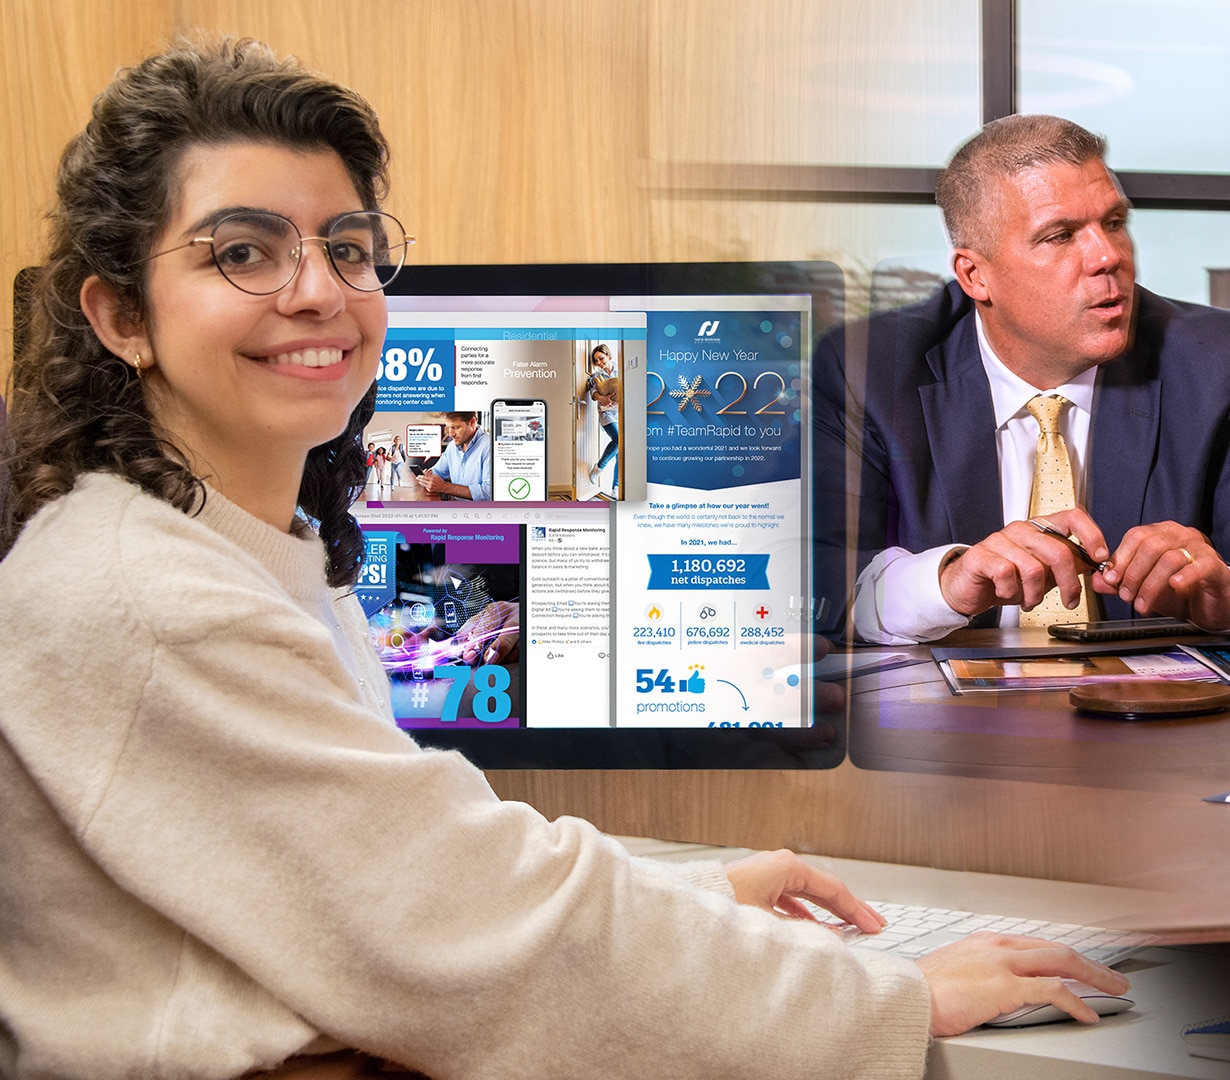 Woman smiling in front of computer with man at desk in background.